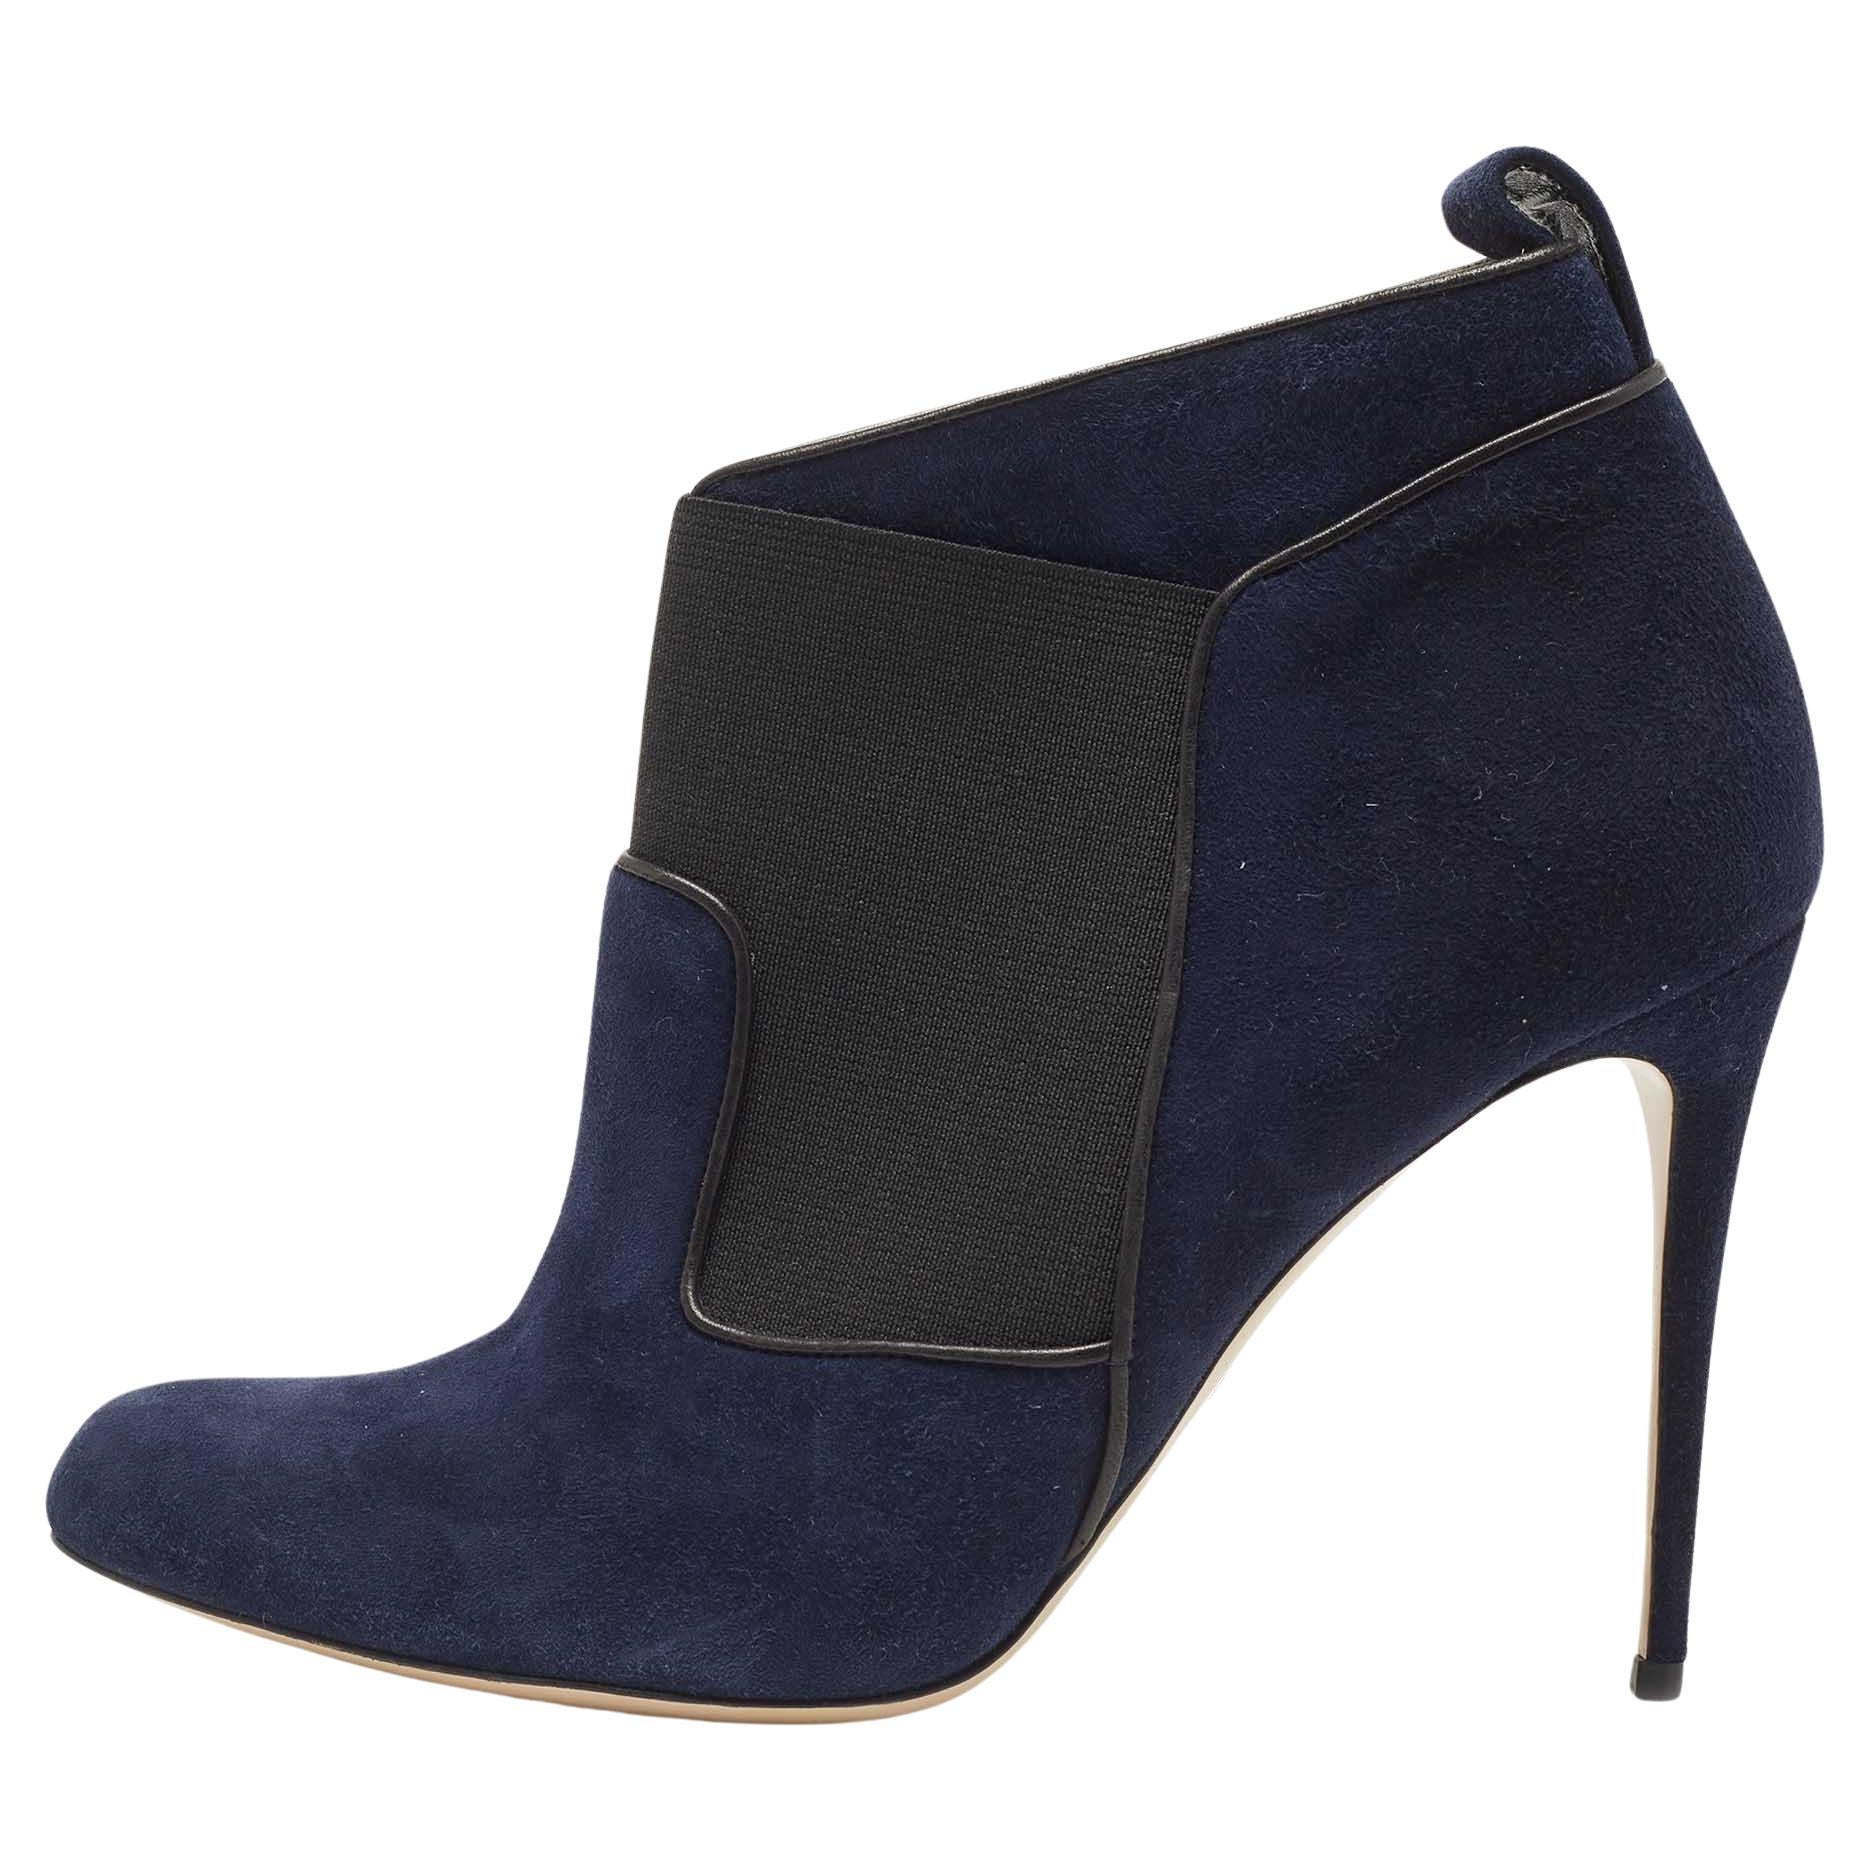 Paul Andrew Navy Blue Suede Ankle Length Boots Size 39 For Sale